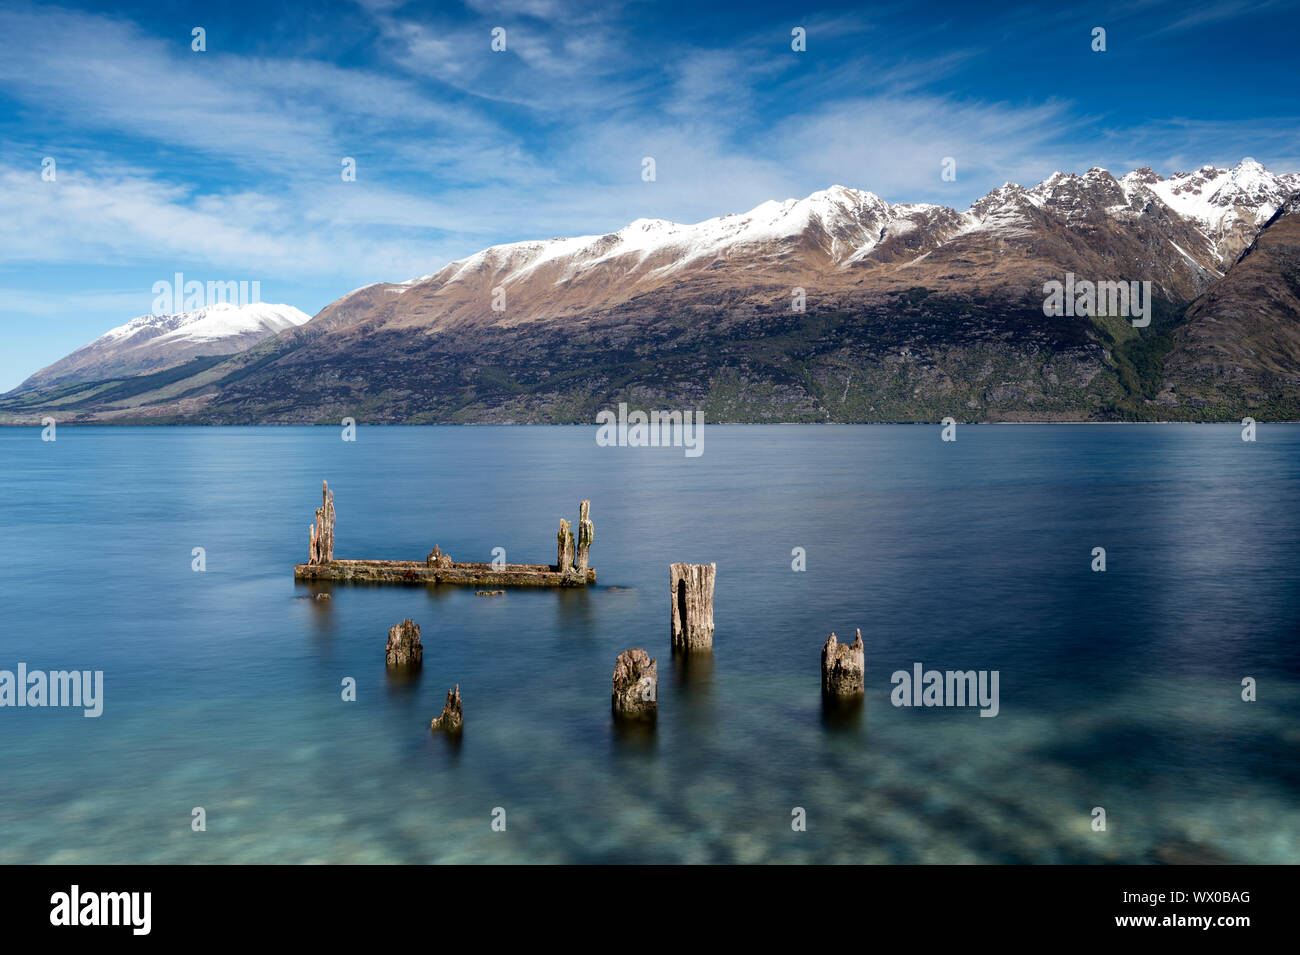 Decayed jetty, old wooden posts in Lake Wakatipu at Glenorchy, Otago Region, South Island, New Zealand, Pacific Stock Photo